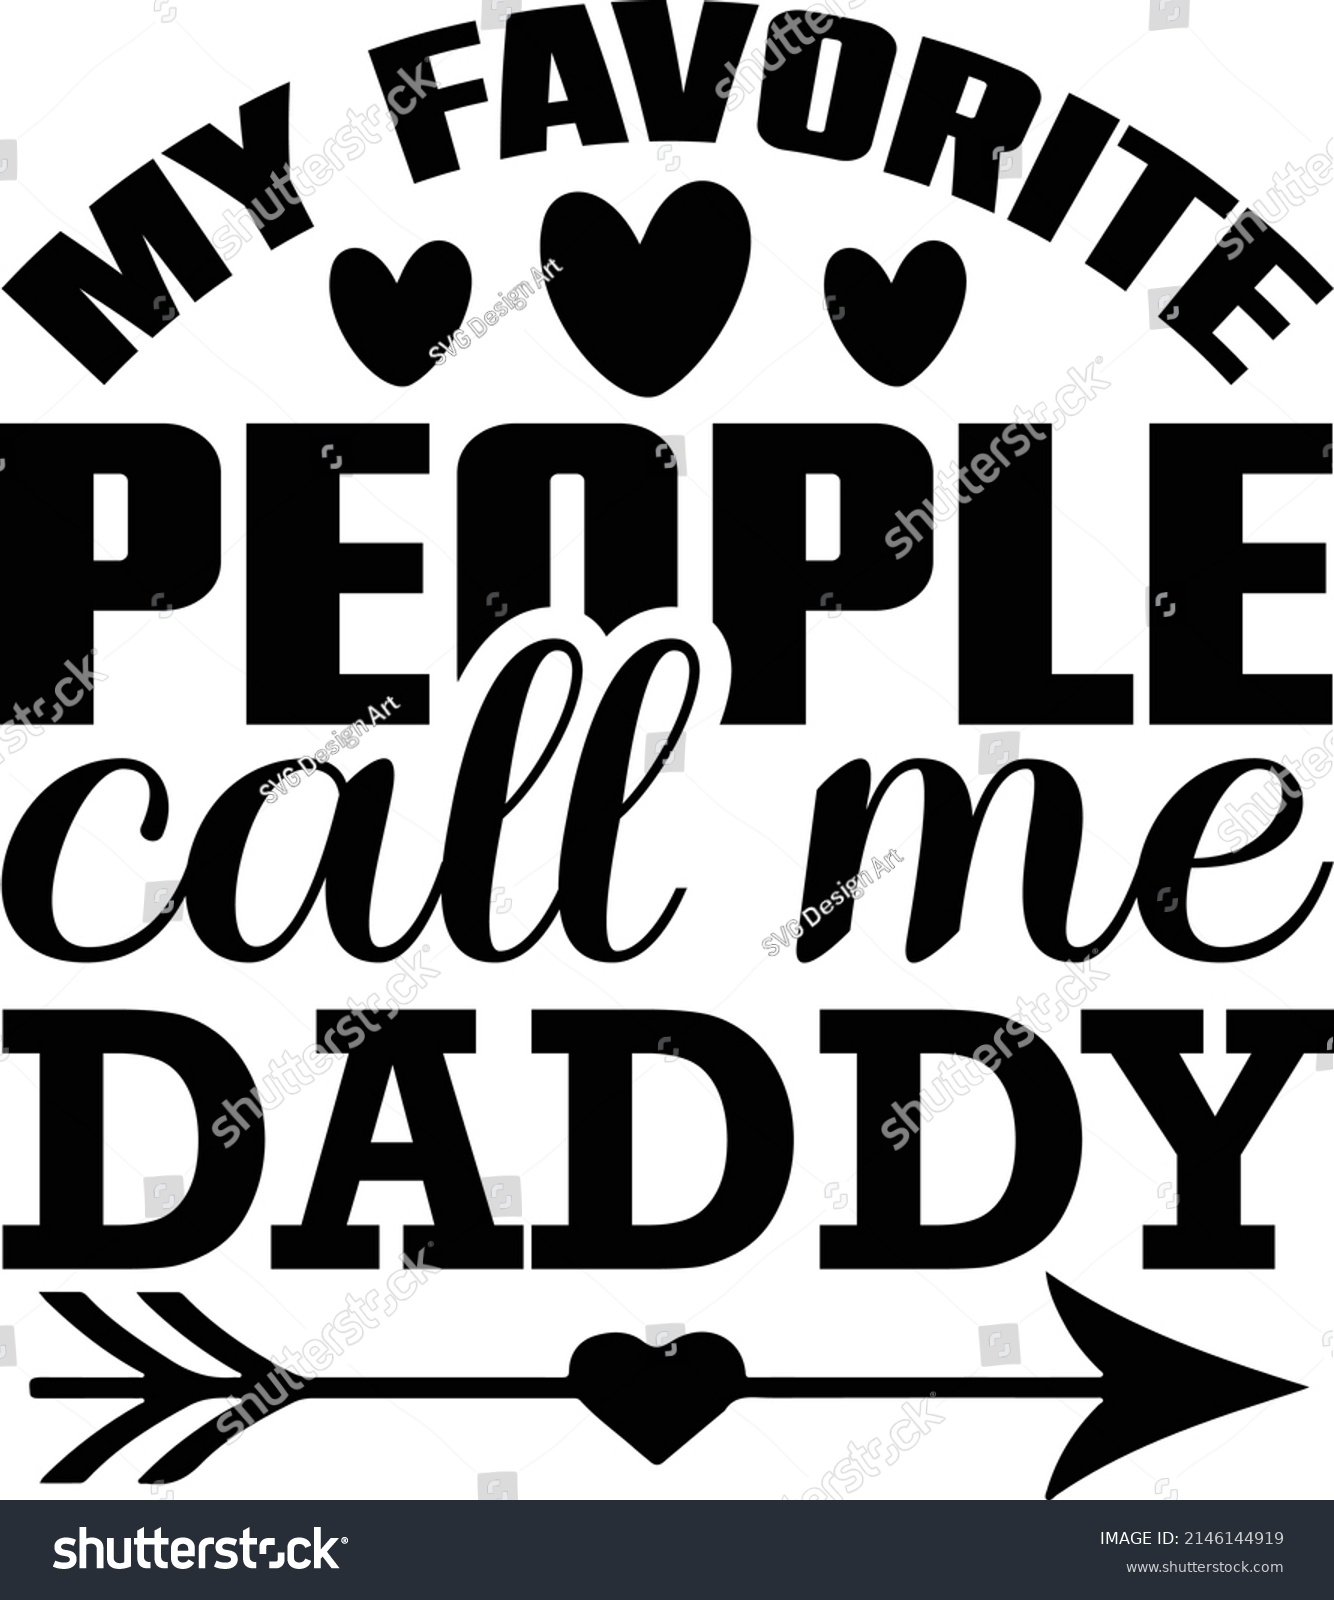 Funny Fathers day svg Design Eps File Digital - Royalty Free Stock ...